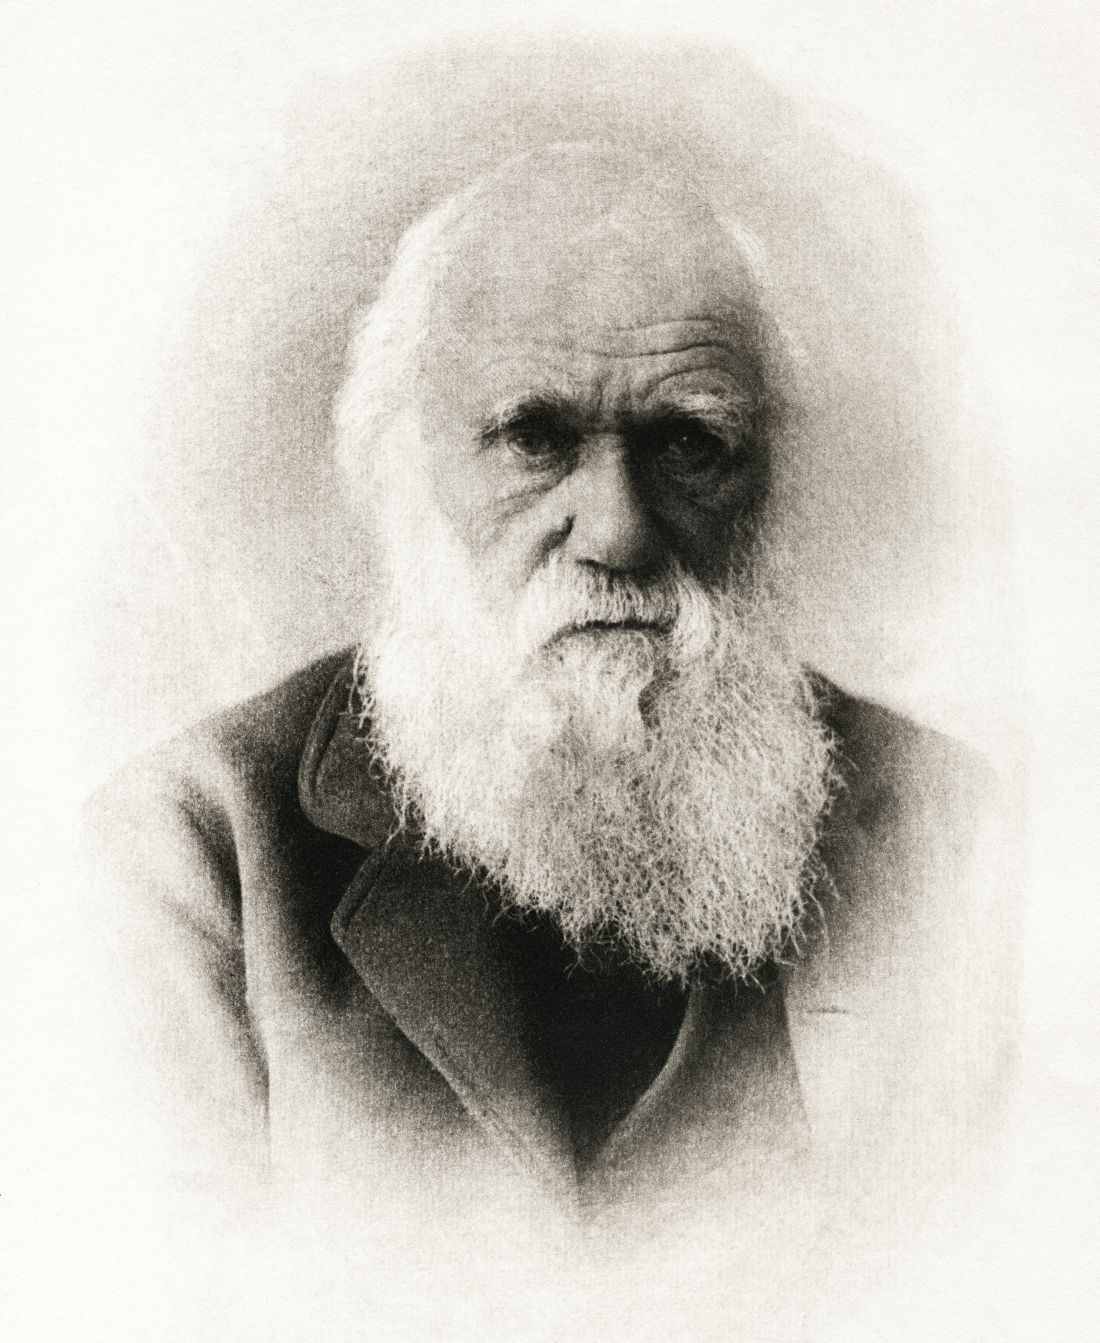 Darwin’s diet of species, umbrellas’ searing SPF, and trypophobia ...